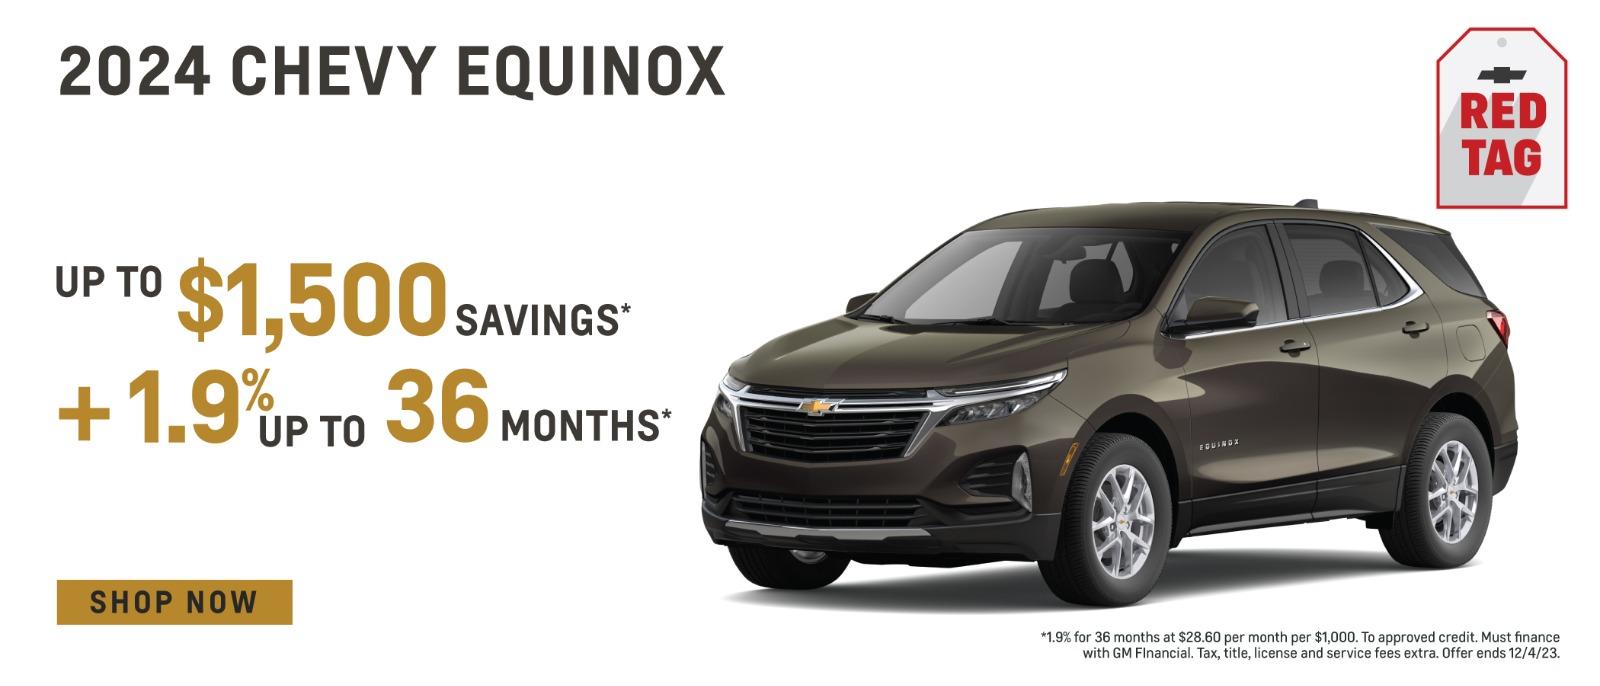 2024 Chevy Equinox  up to $1,500 savings + 1.9% APR up to 36 Months